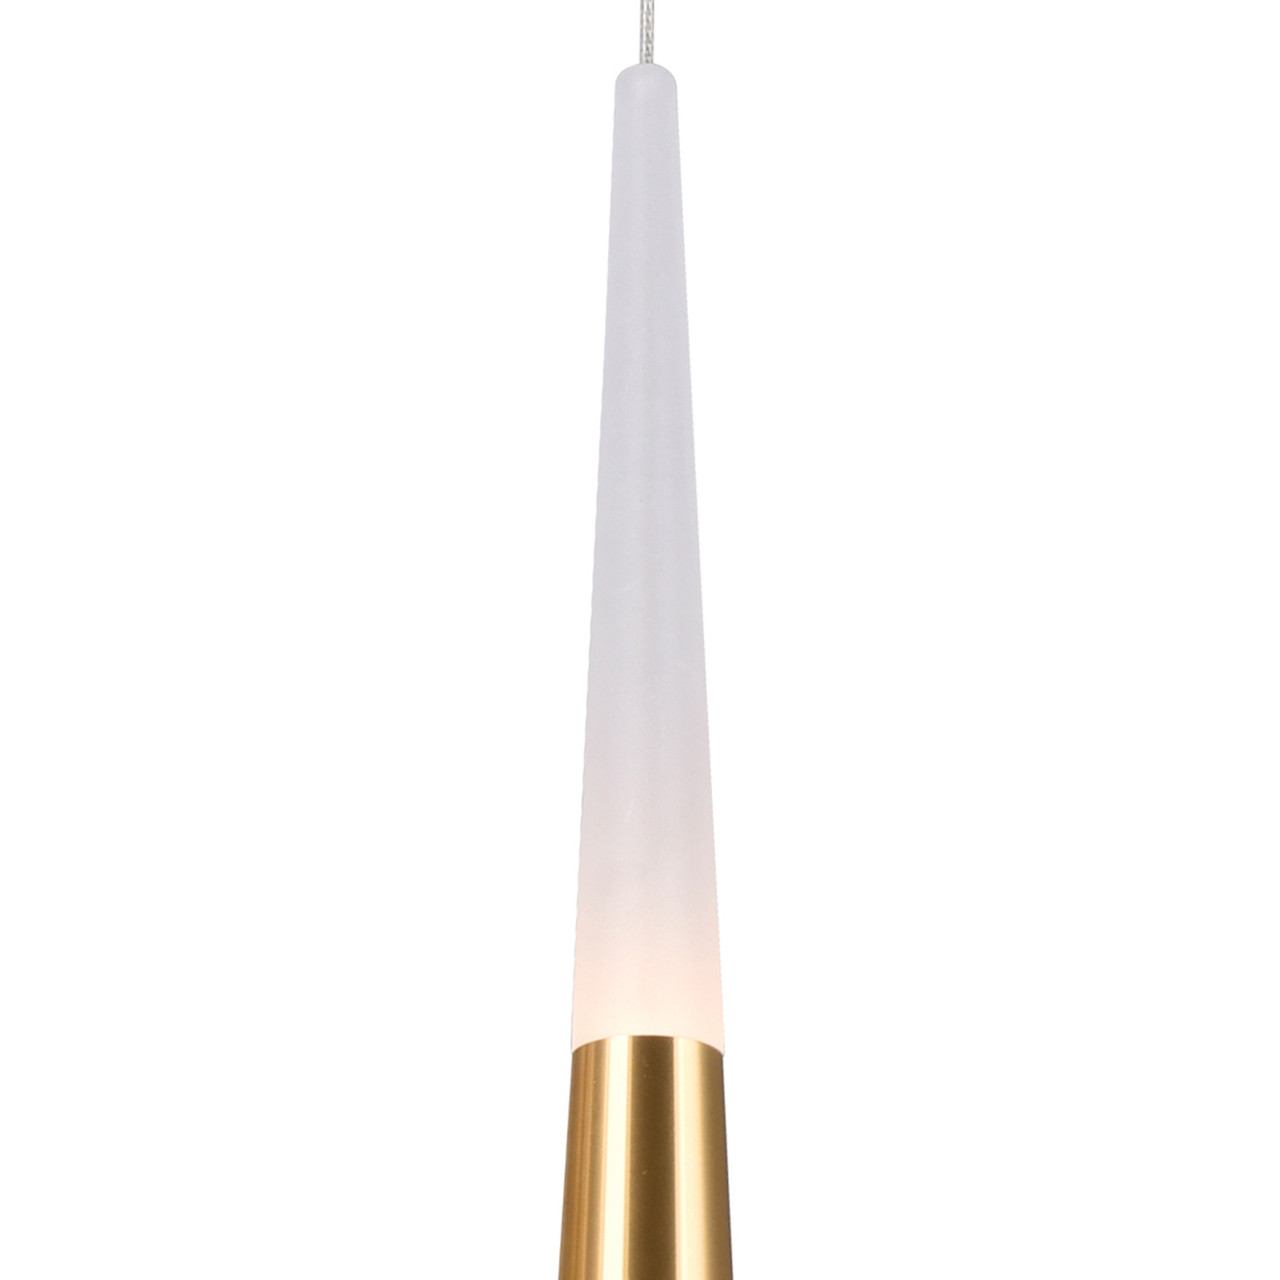 CWI LIGHTING 1103P40-36-602 Andes LED Multi Light Pendant With Satin Gold Finish